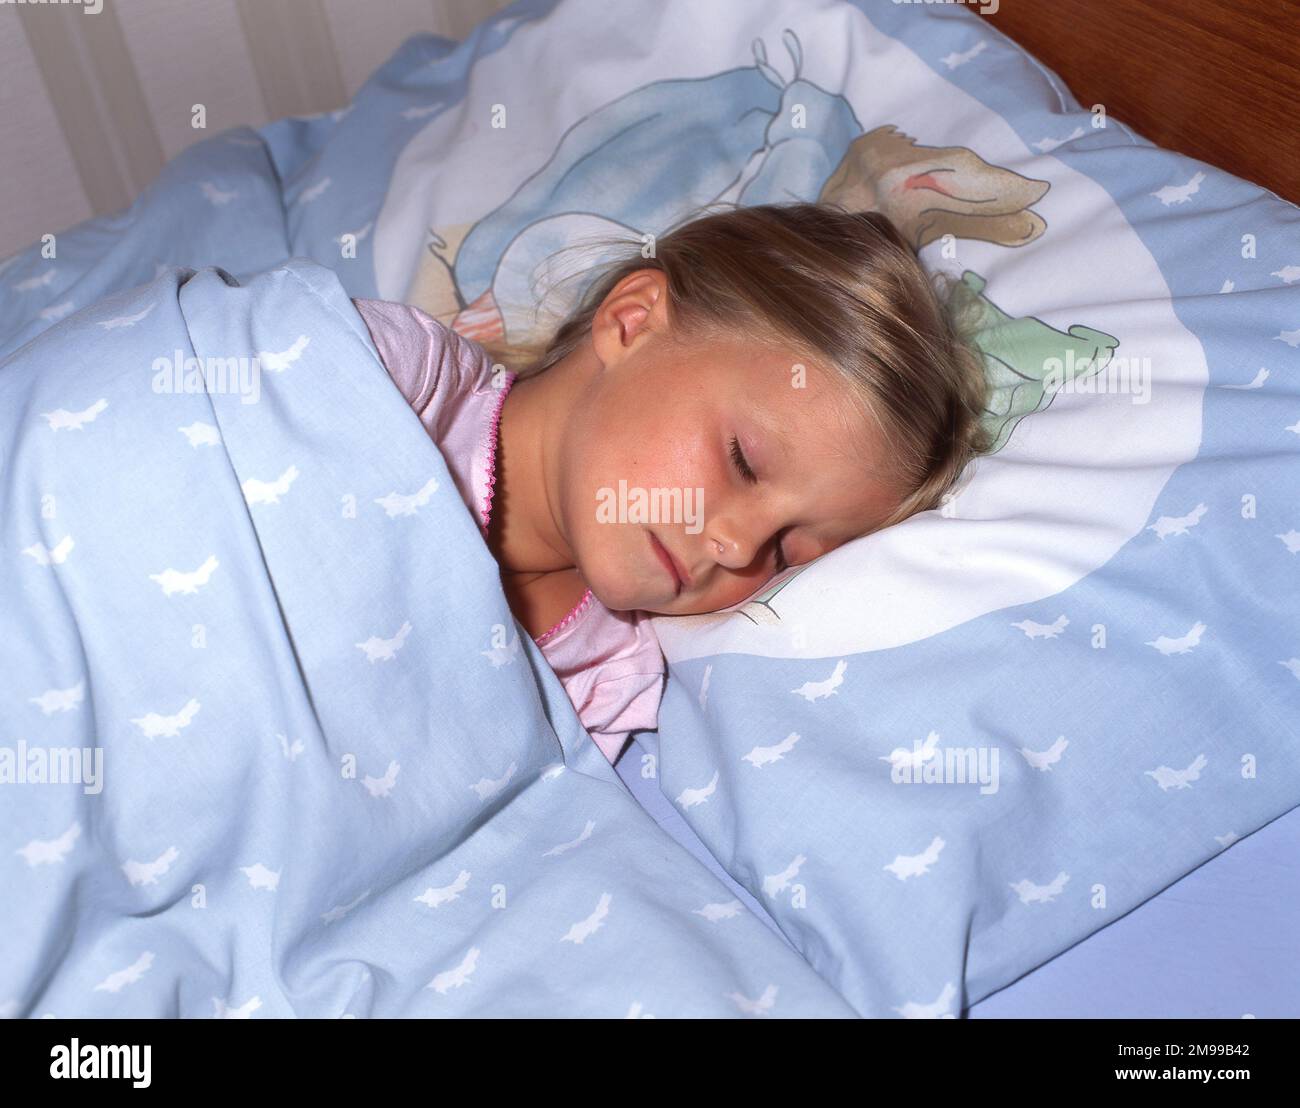 Young girl asleep in bed, Winkfield, Berkshire, England, United Kingdom Stock Photo